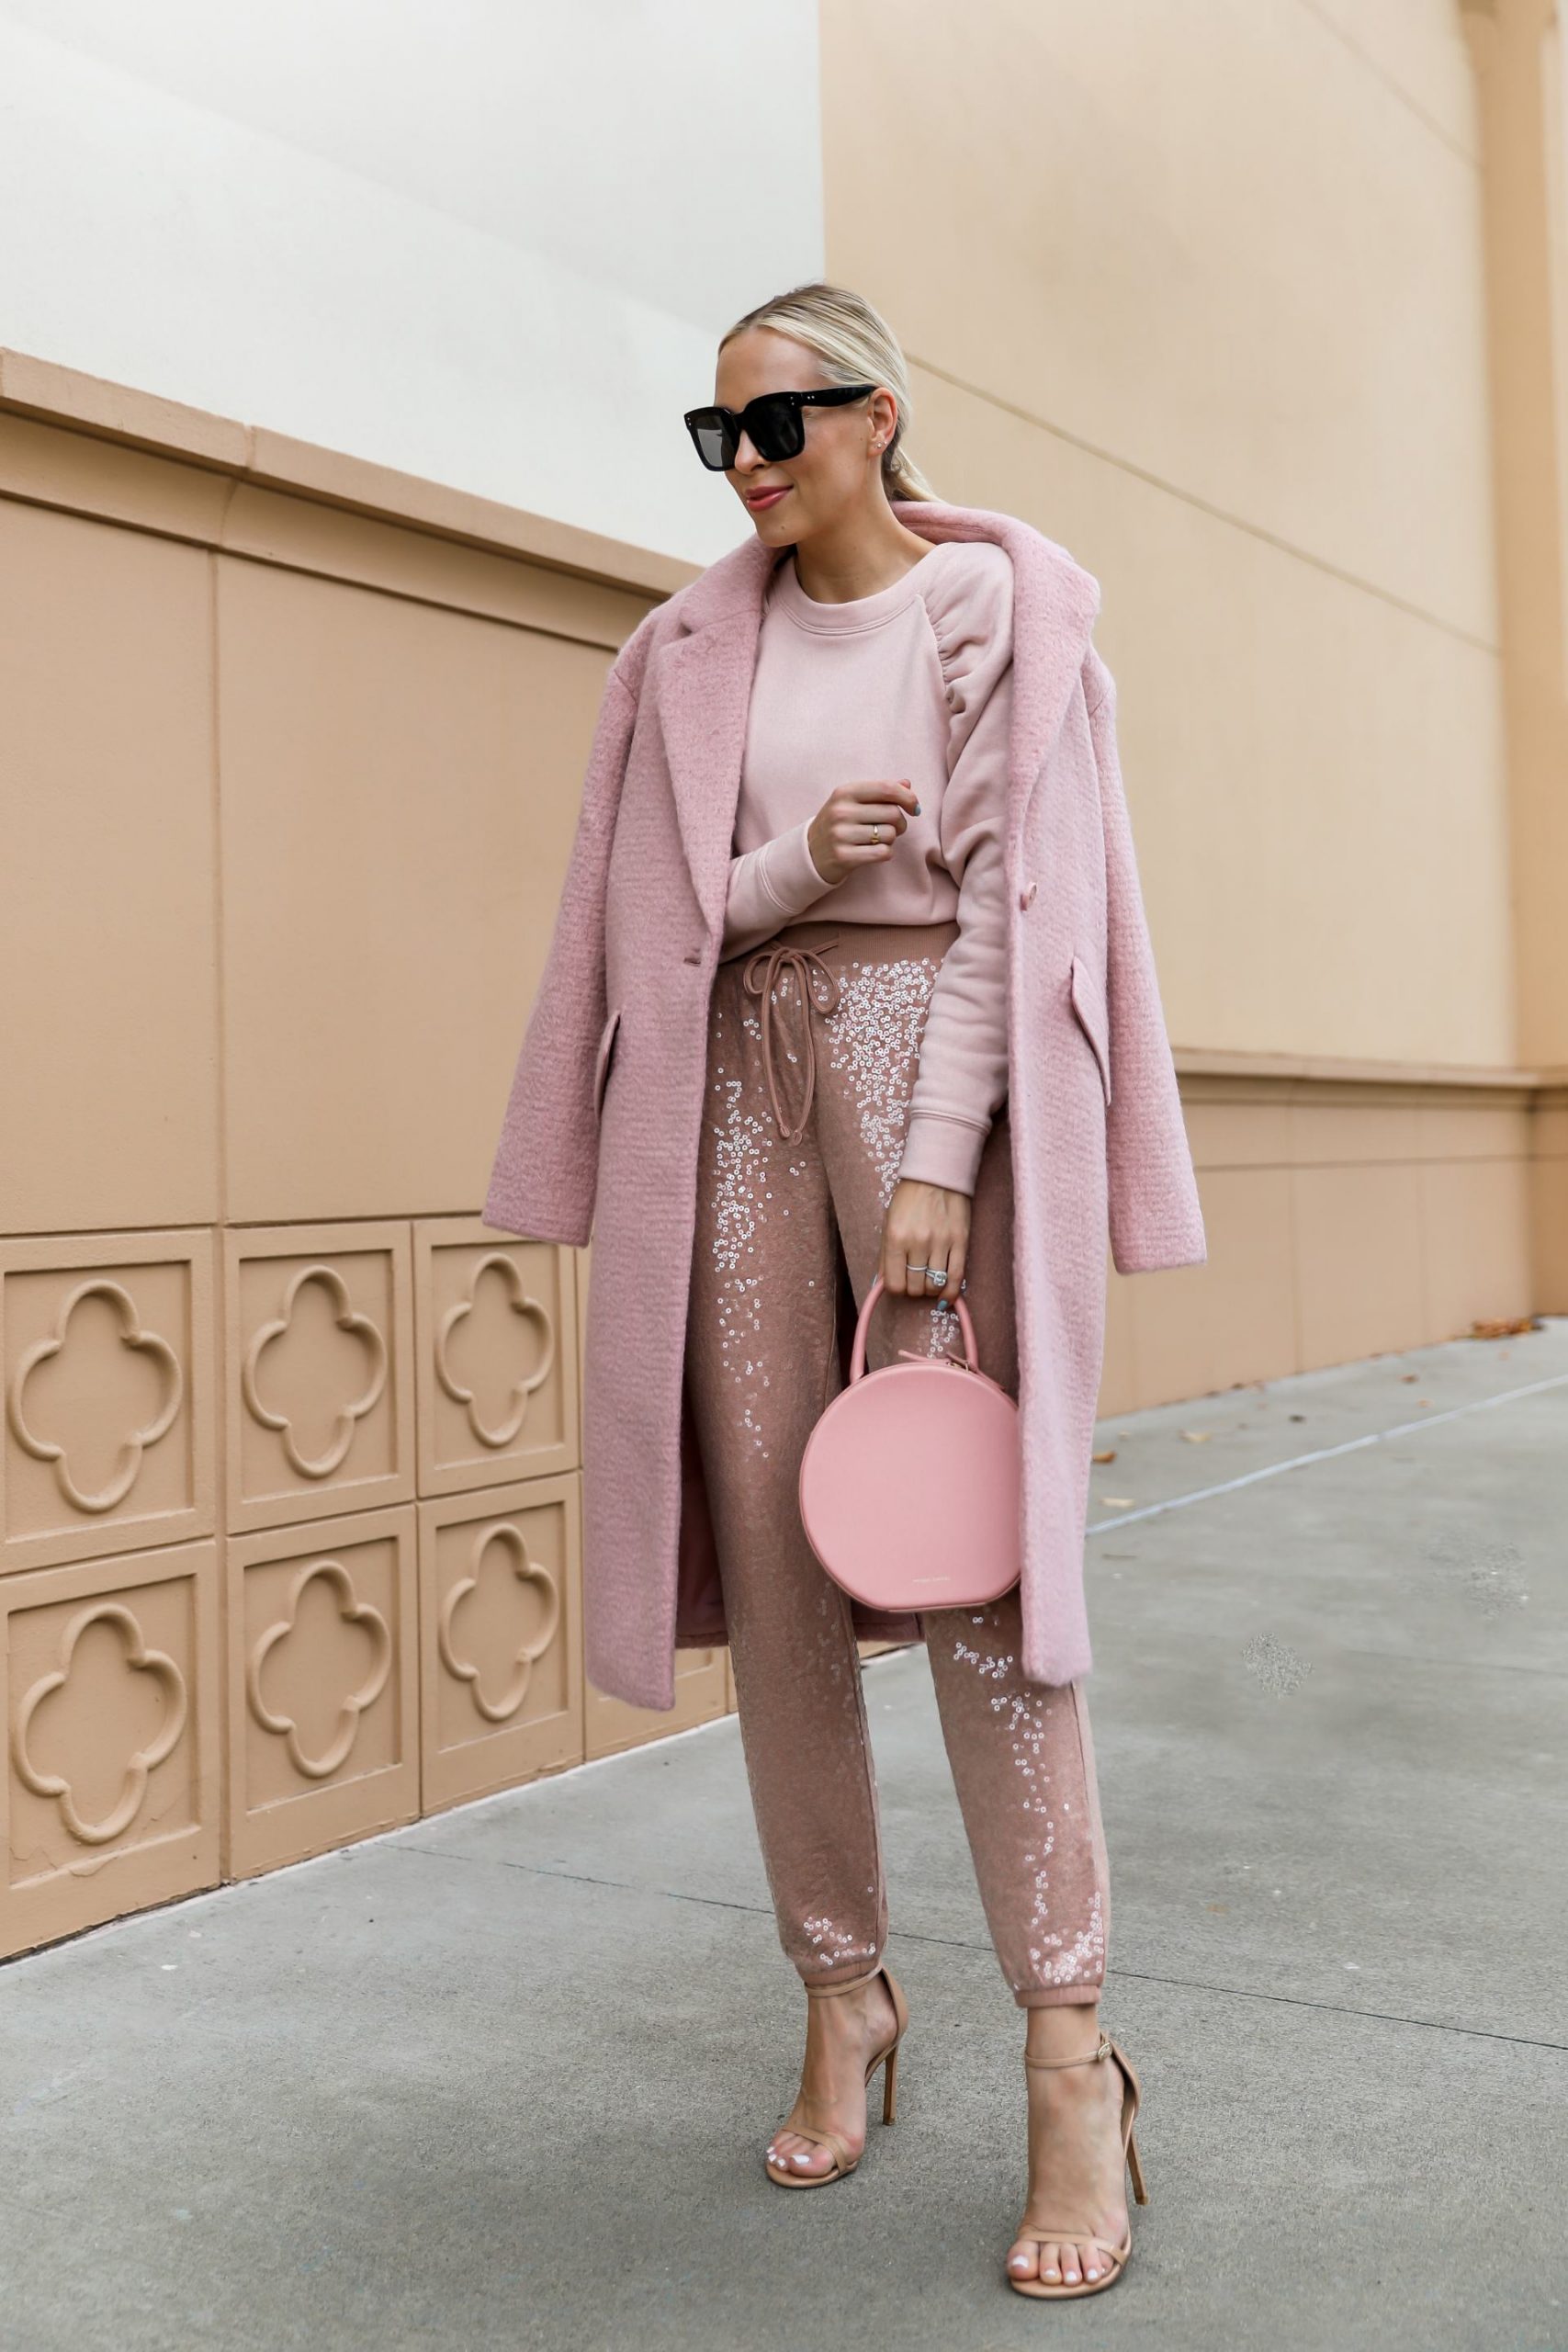 Best Black Friday sale finds from Express, including blazers, coats, sweaters and sweat dresses, all 50% off. Featured by San Francisco fashion blogger Lombard & Fifth.